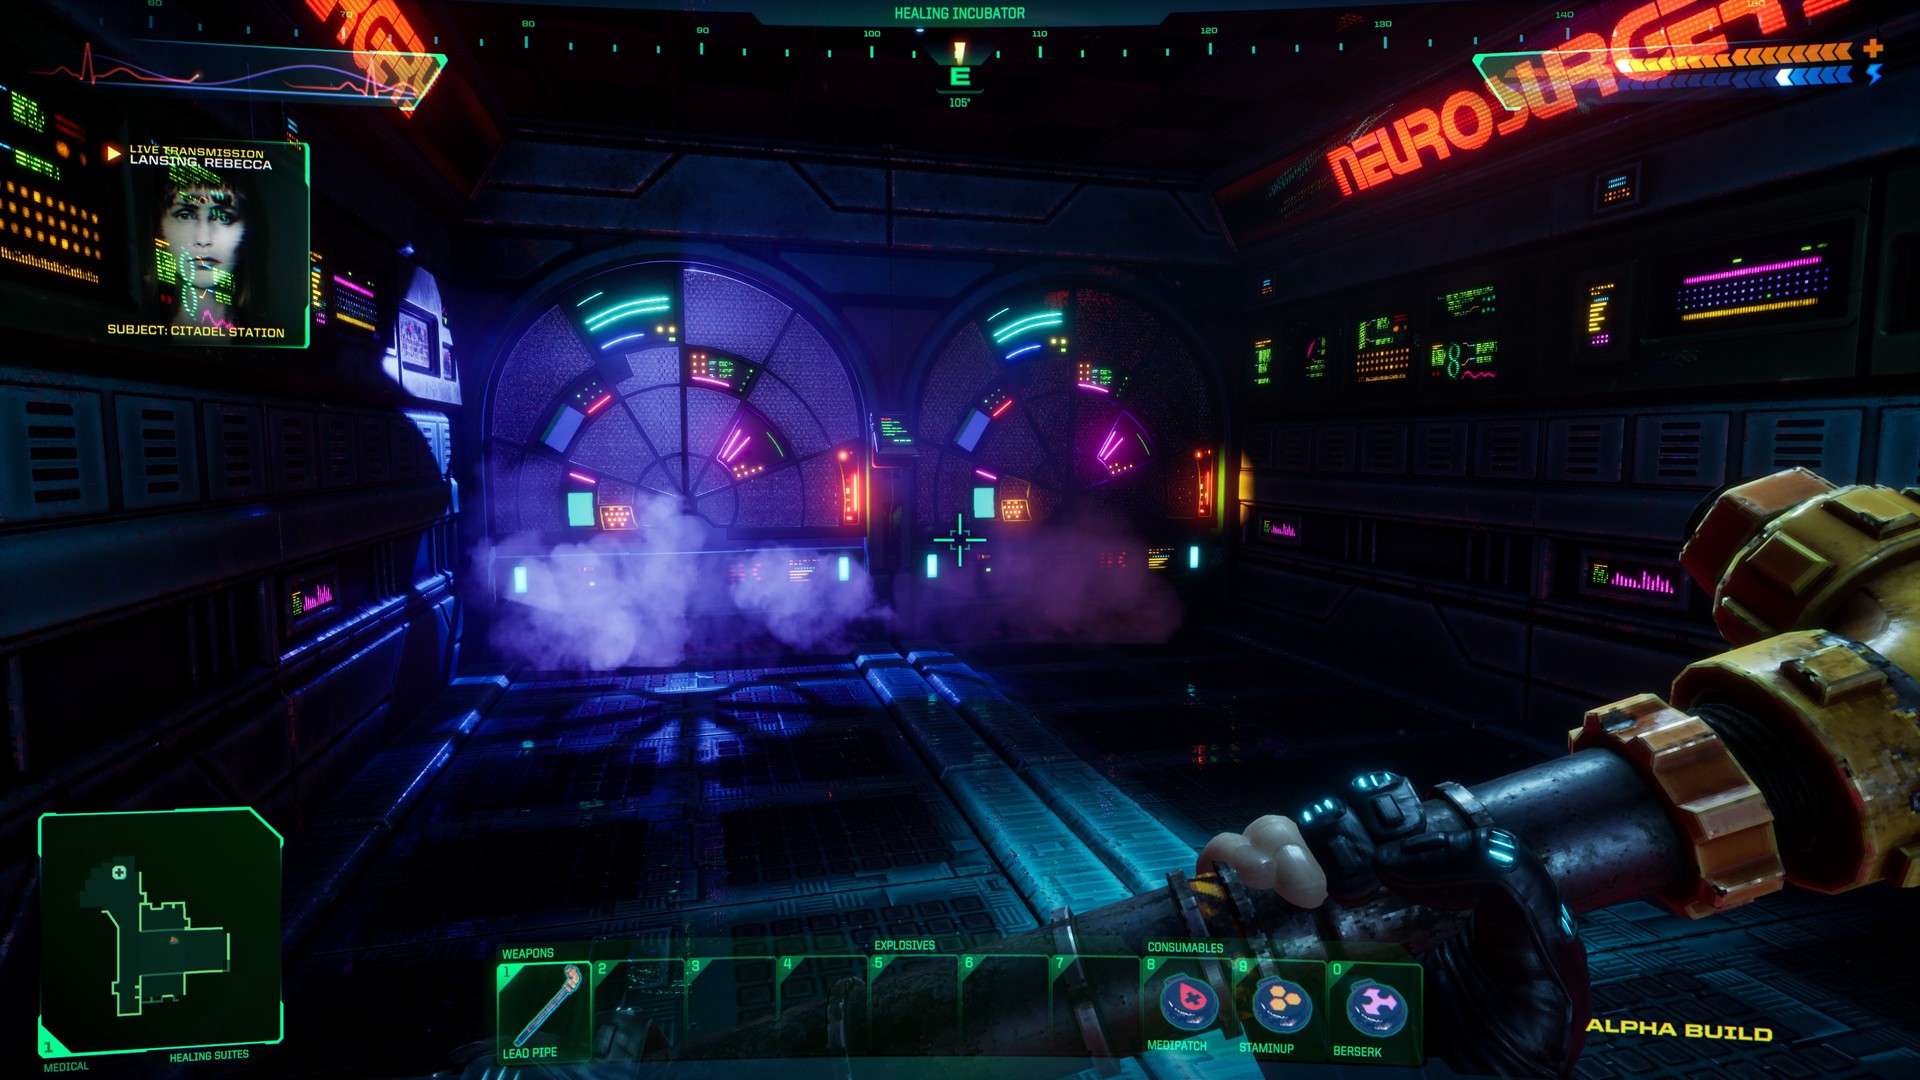 system shock 2018 release date